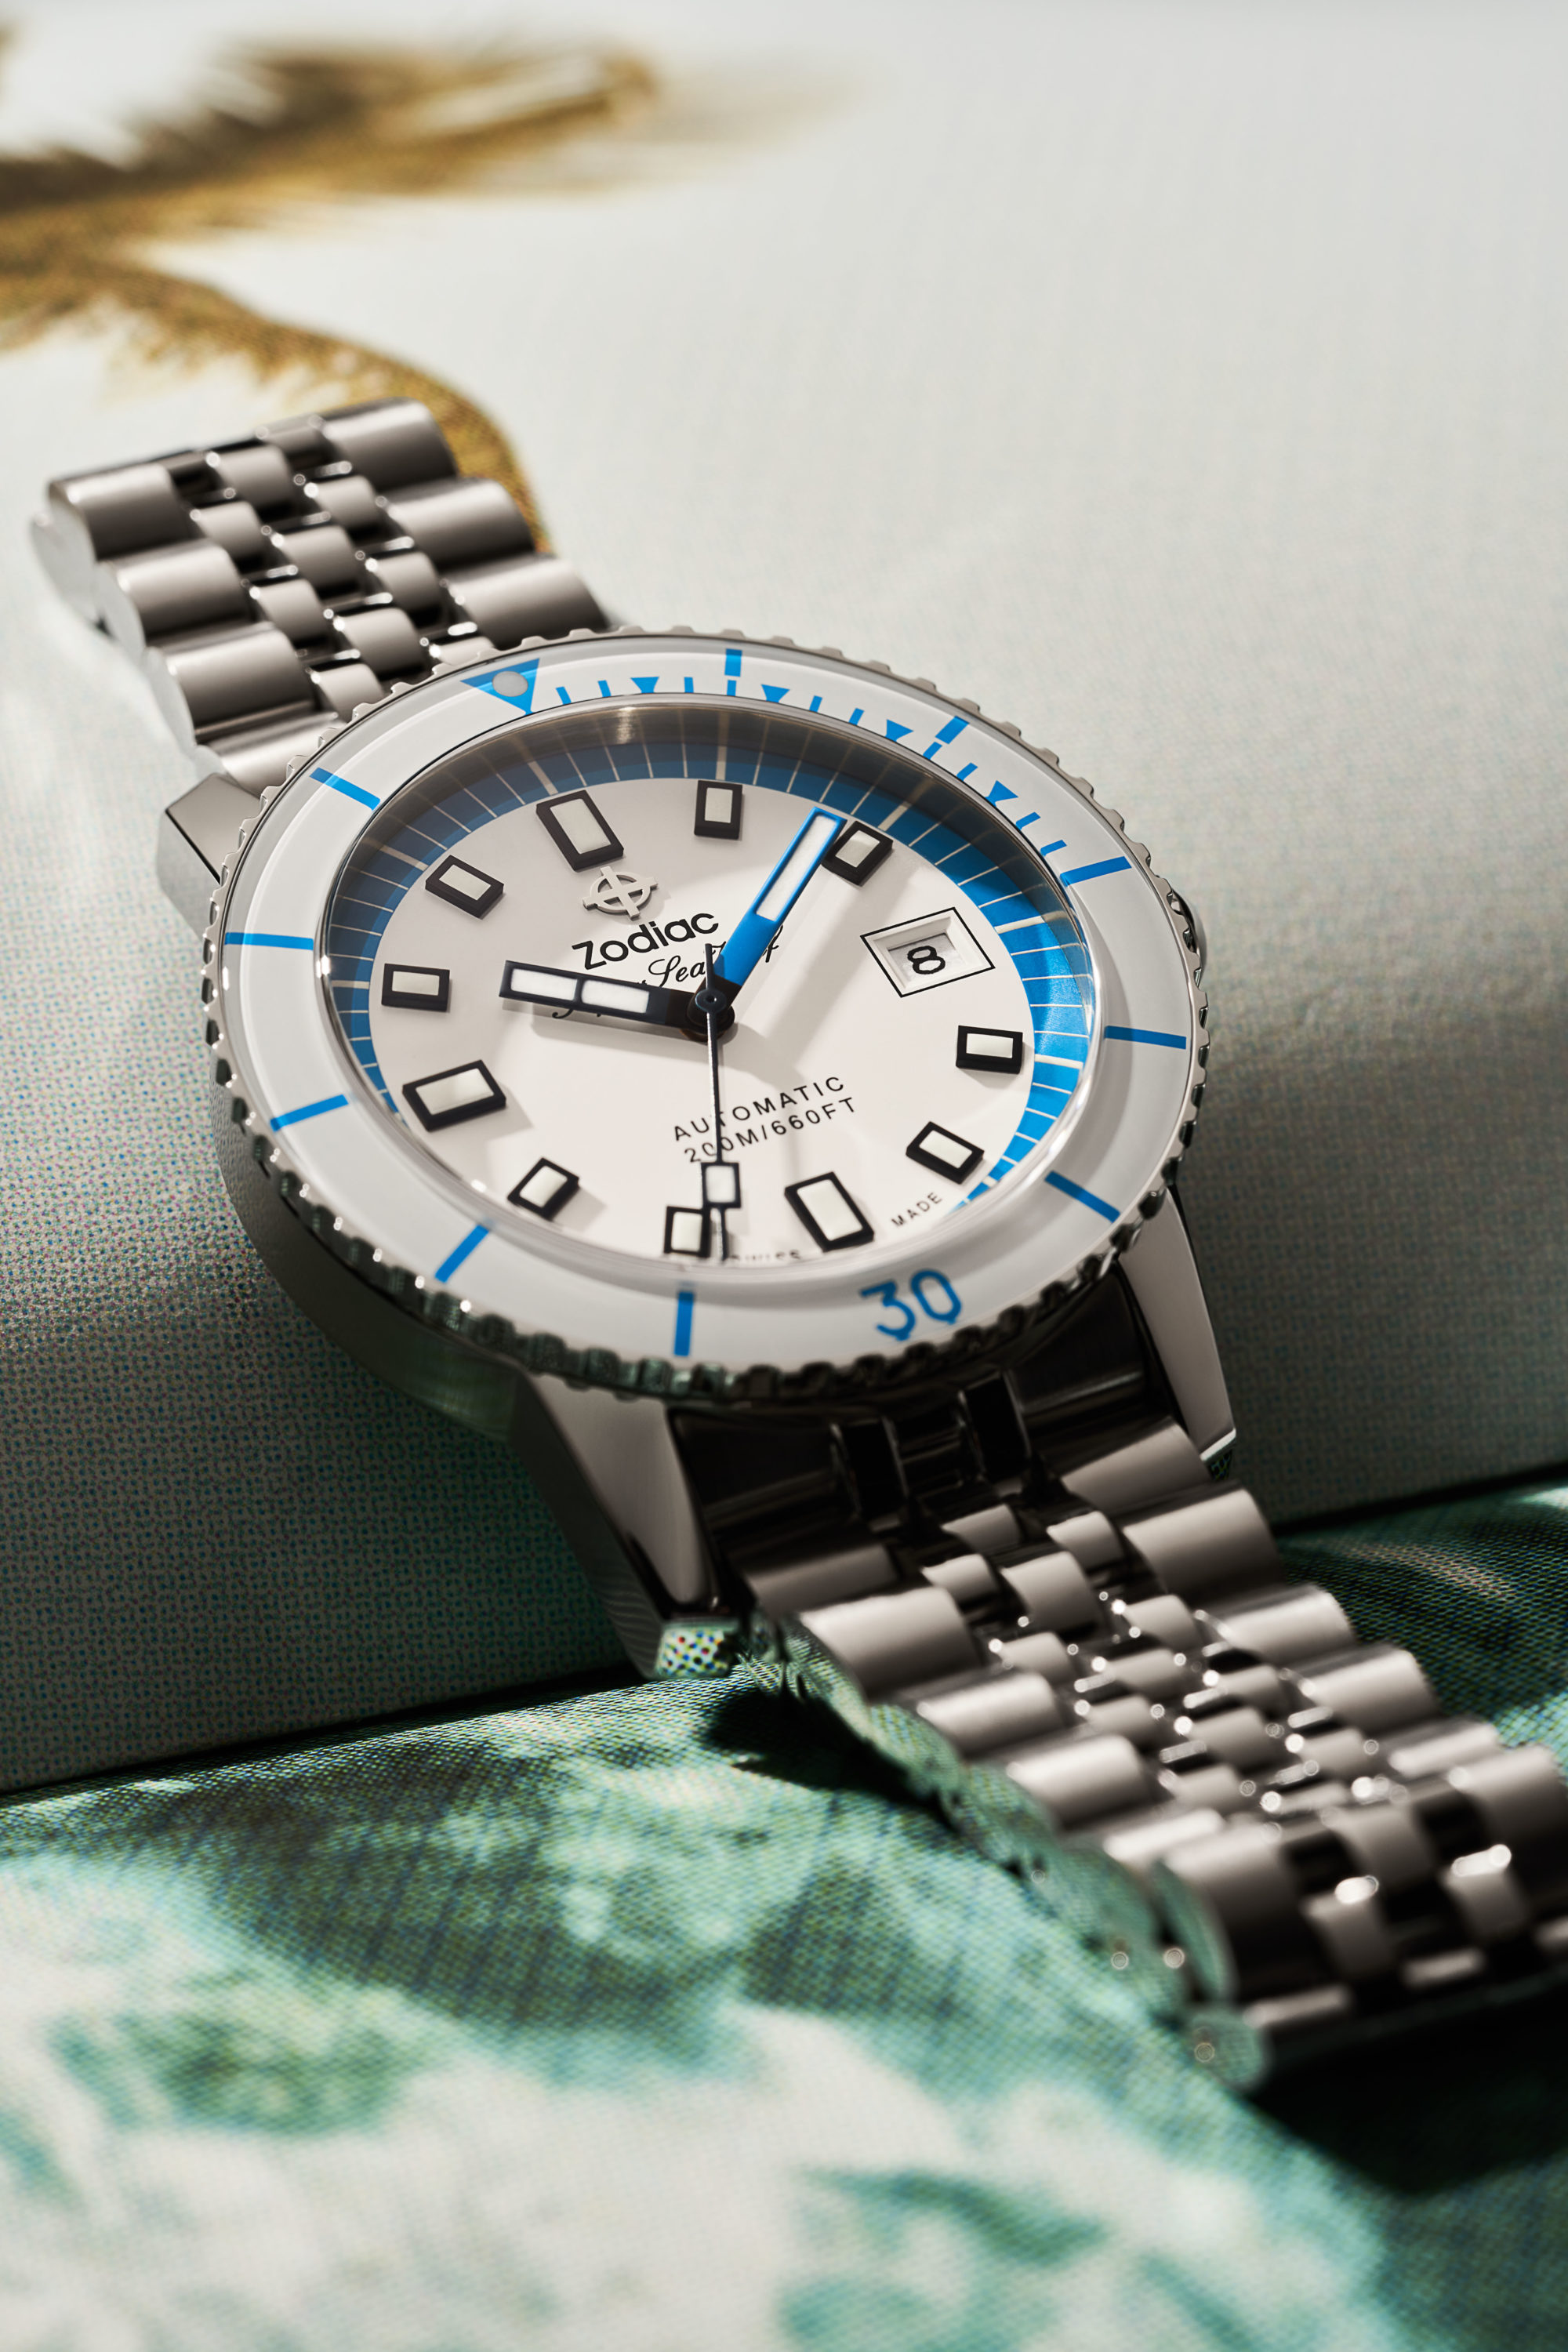 Meet the Latest Execution of Zodiac’s Super Sea Wolf Compression Automatic